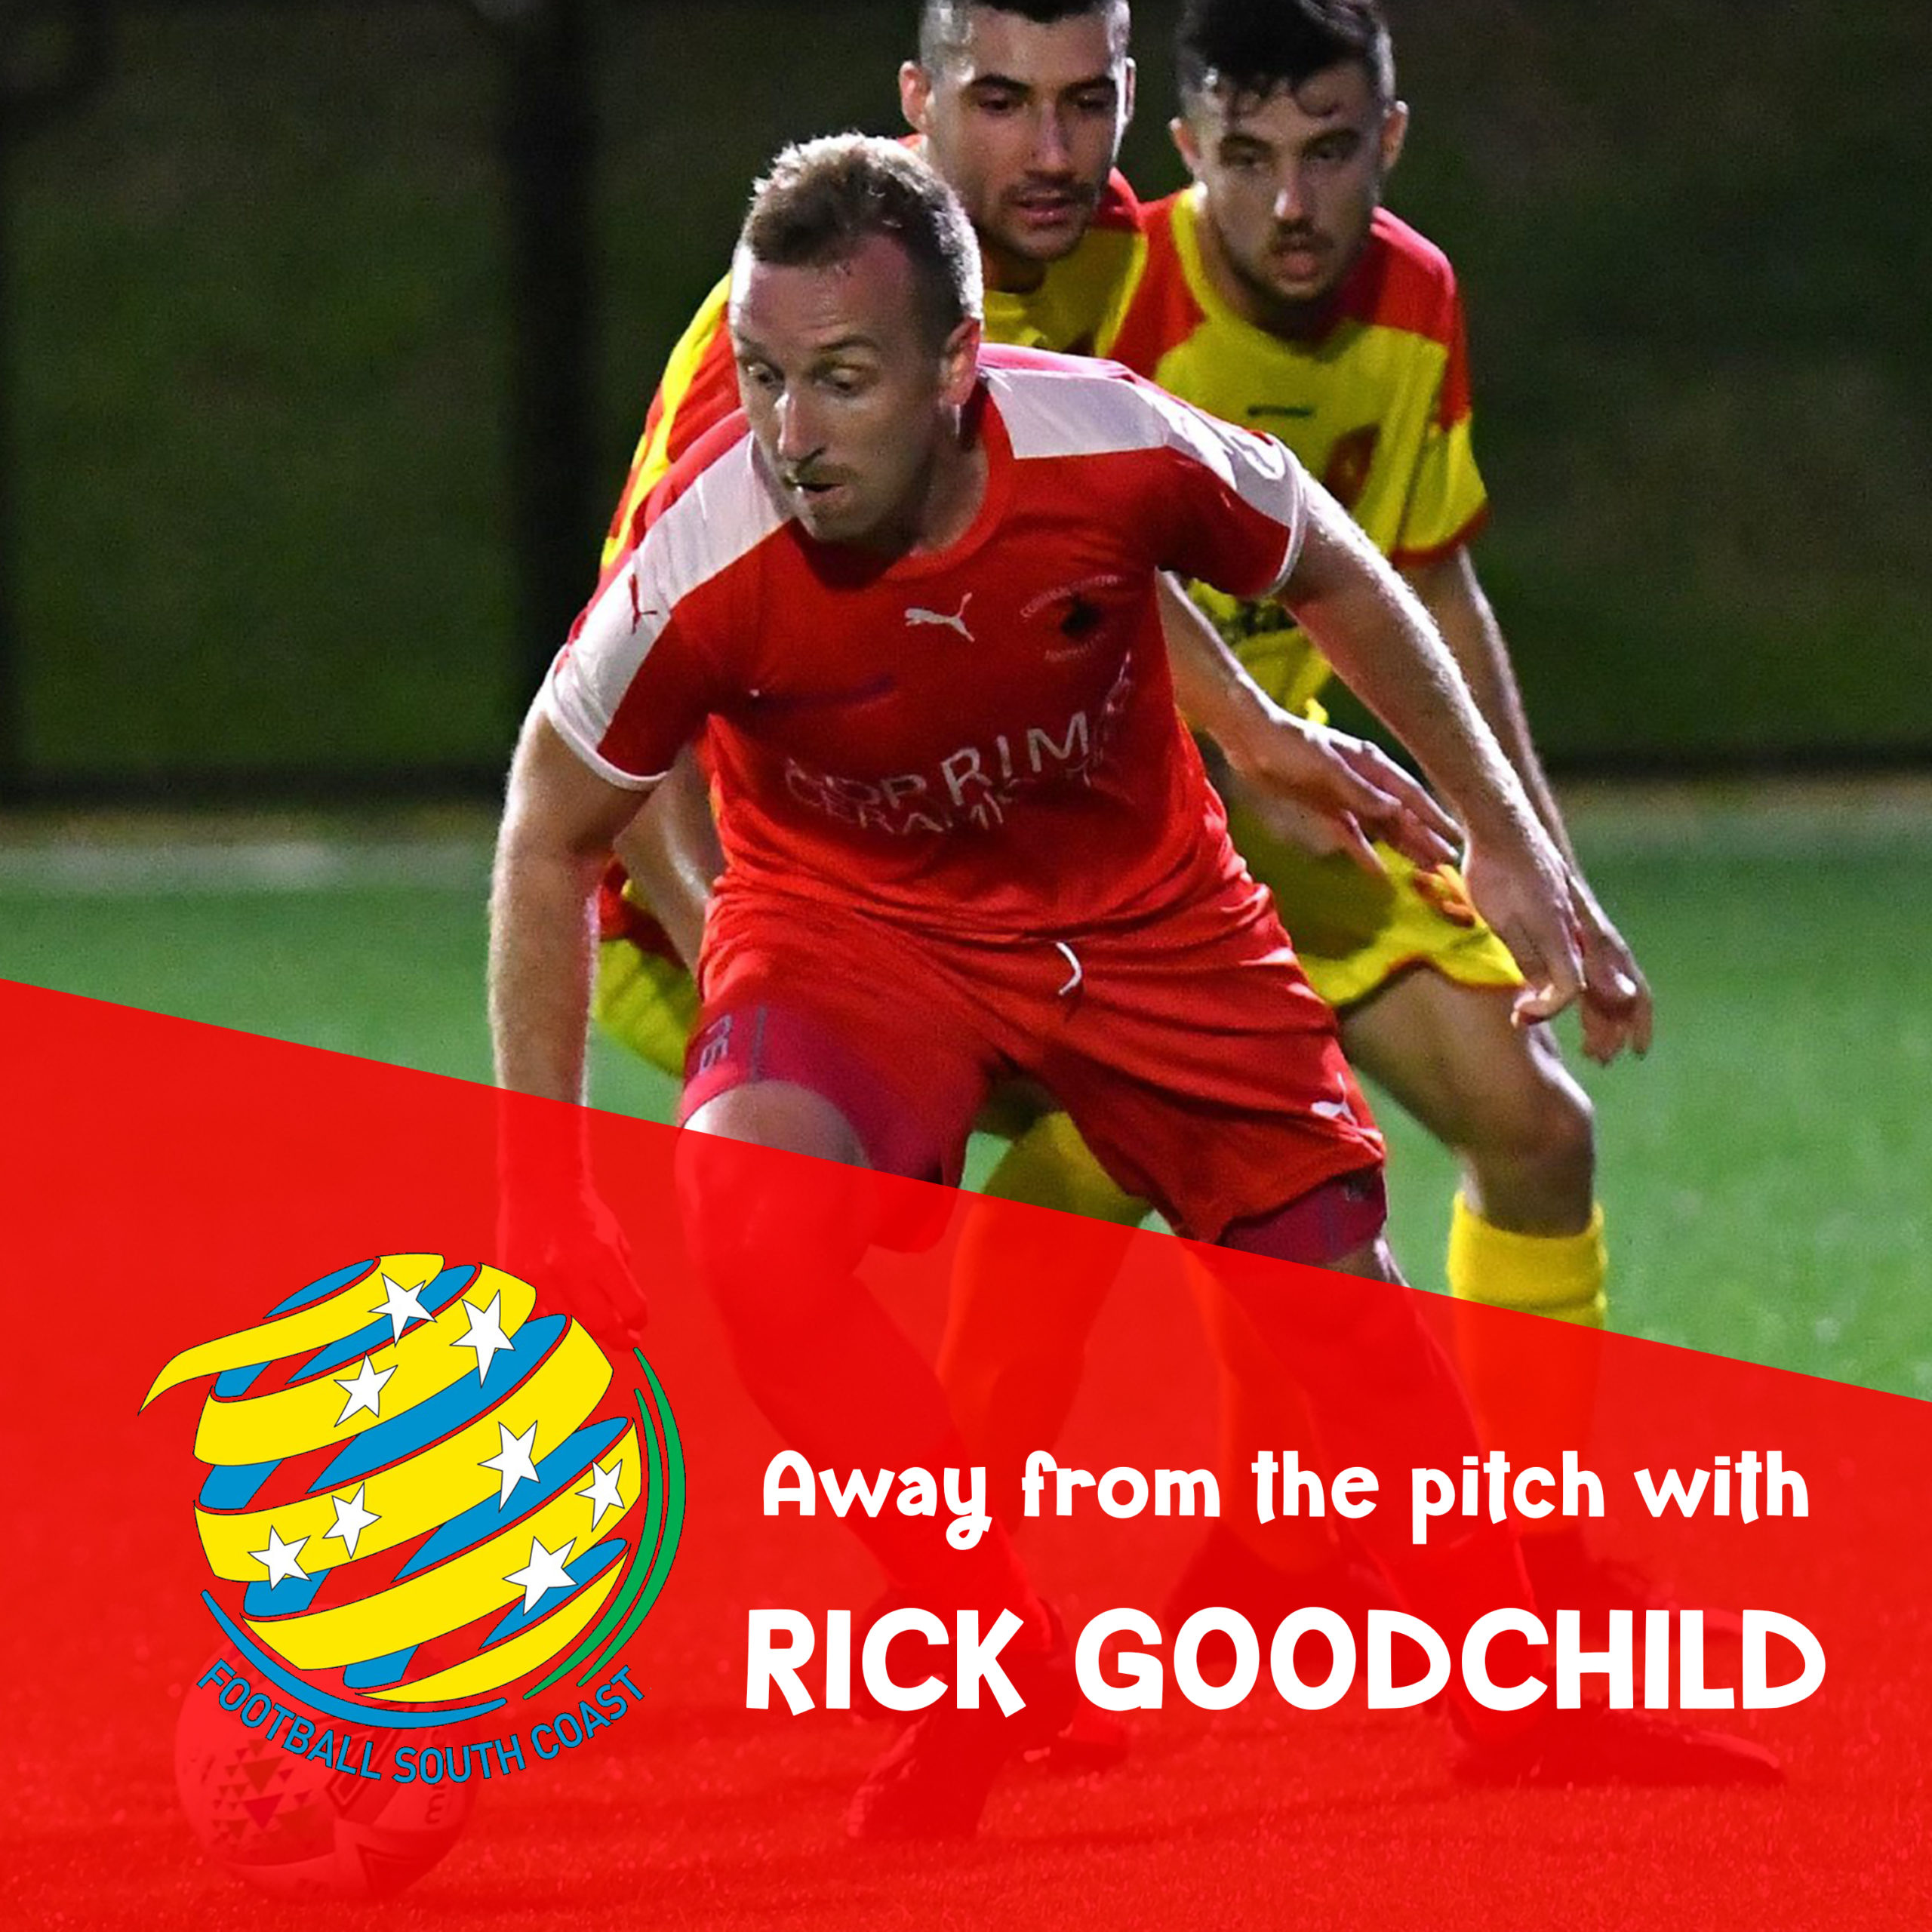 Away from the pitch with Rick Goodchild artwork